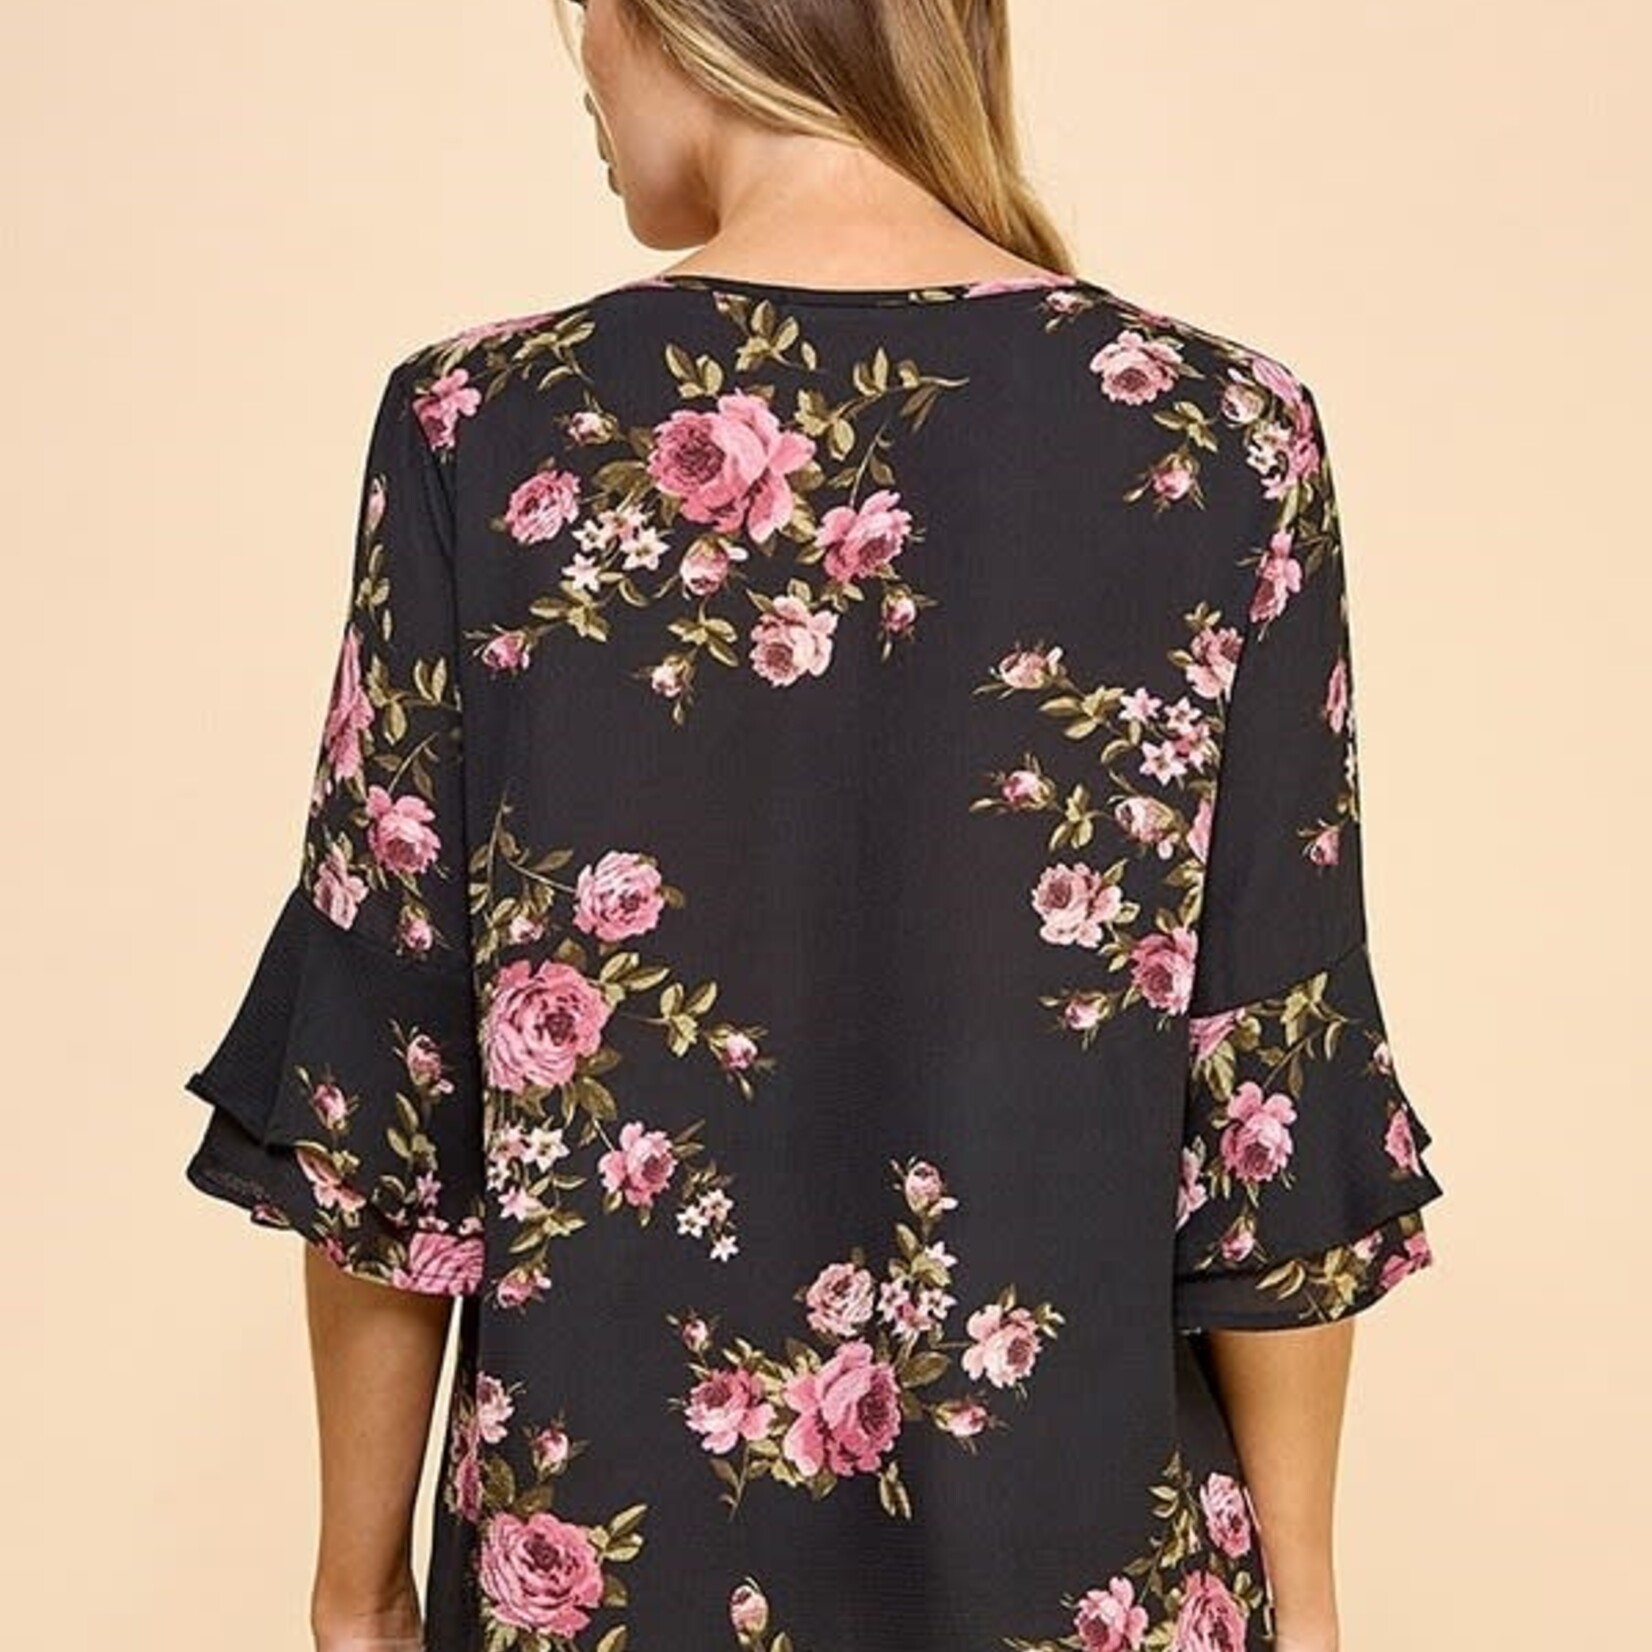 True Lovely Floral Top